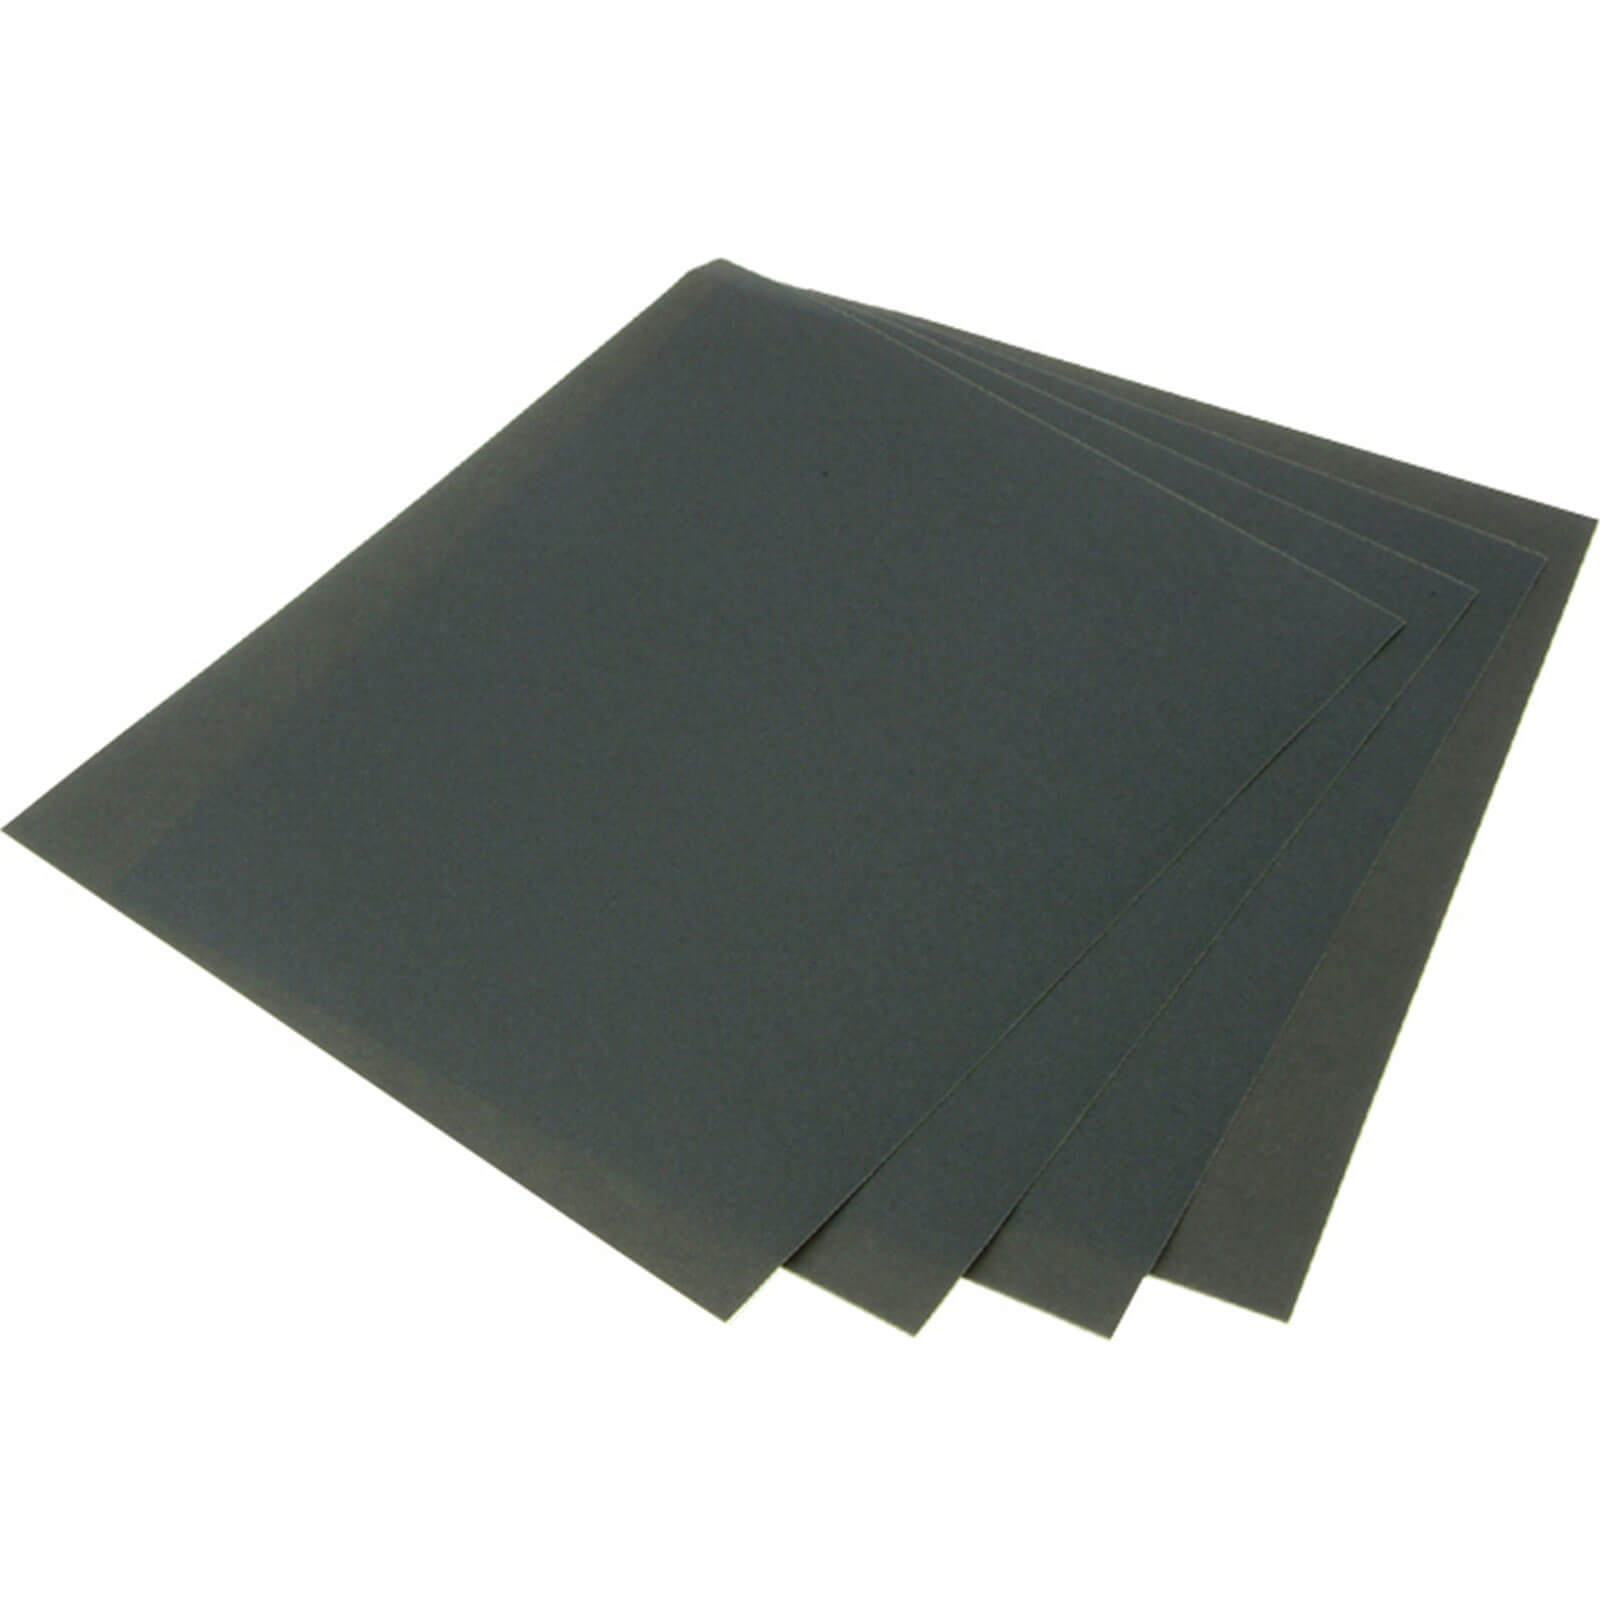 Image of Faithfull Wet and Dry Paper Sheets 230 x 280mm 120g Pack of 25